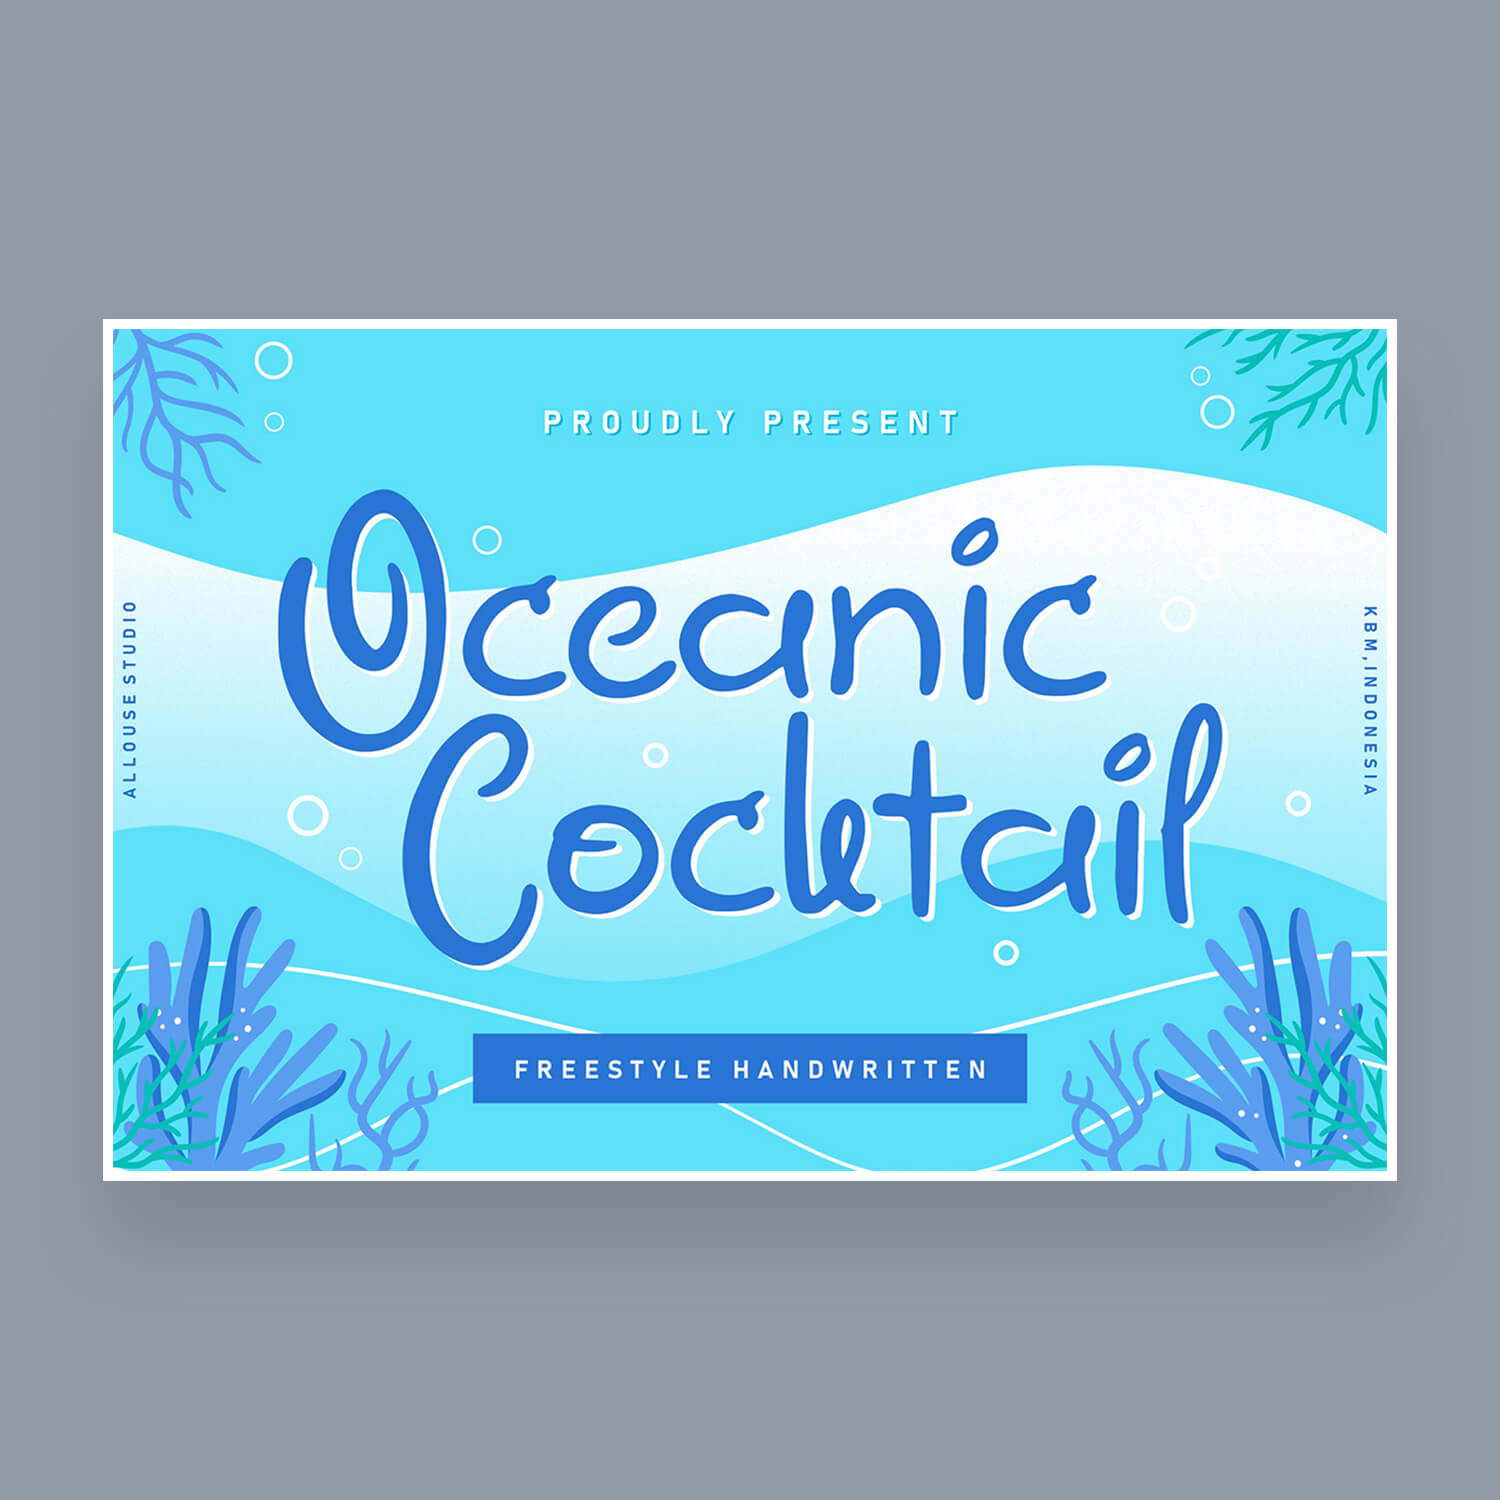 oceanic cocktail freestyle handwritten font cover image.